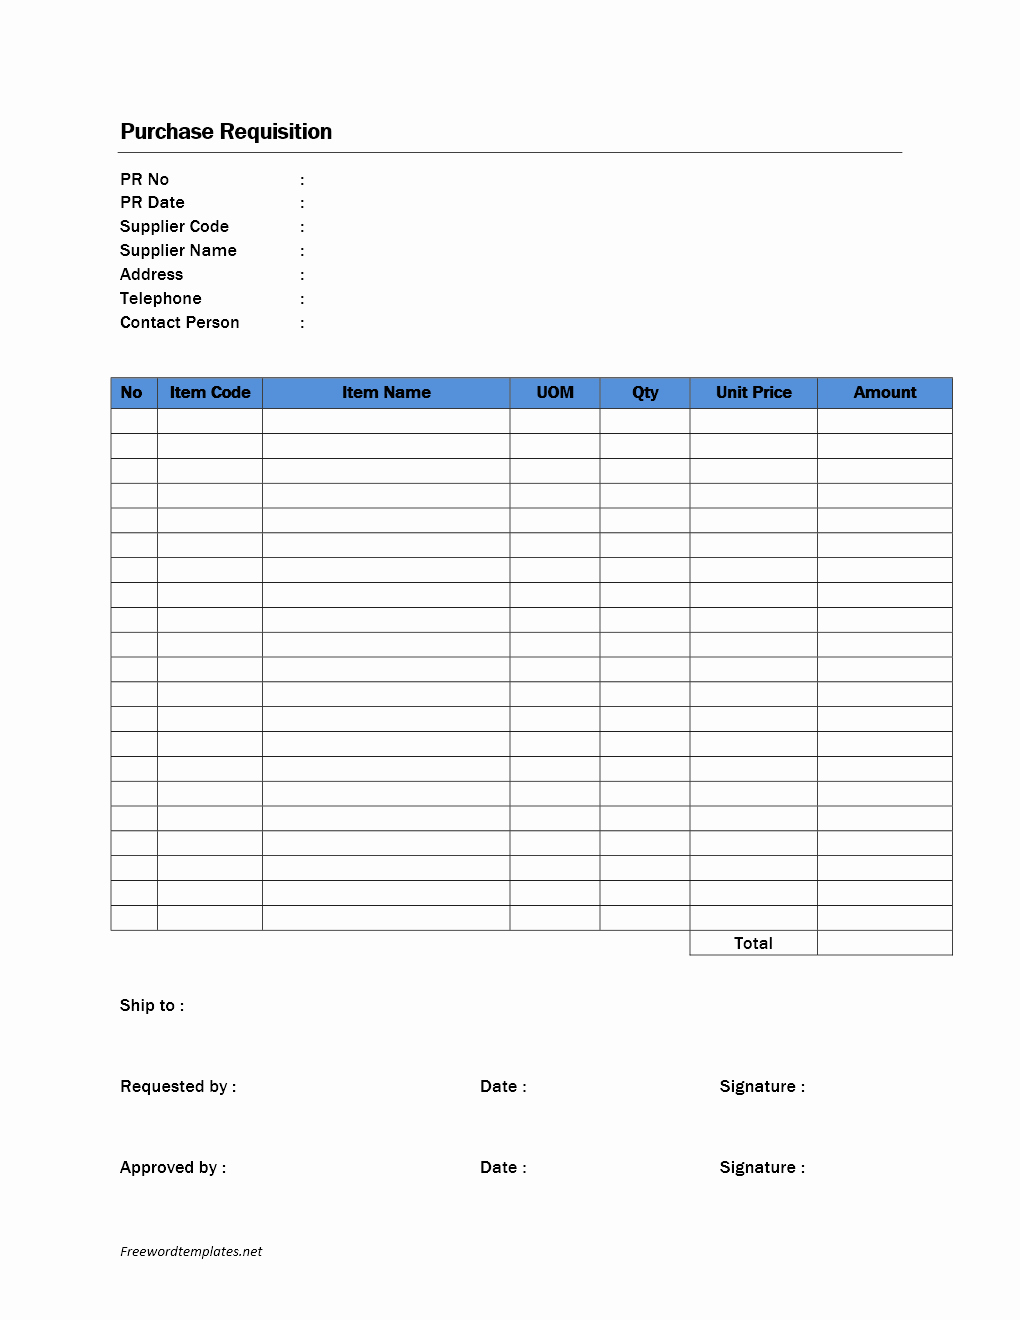 Purchase order Template Microsoft Word Unique Purchase Requisition form